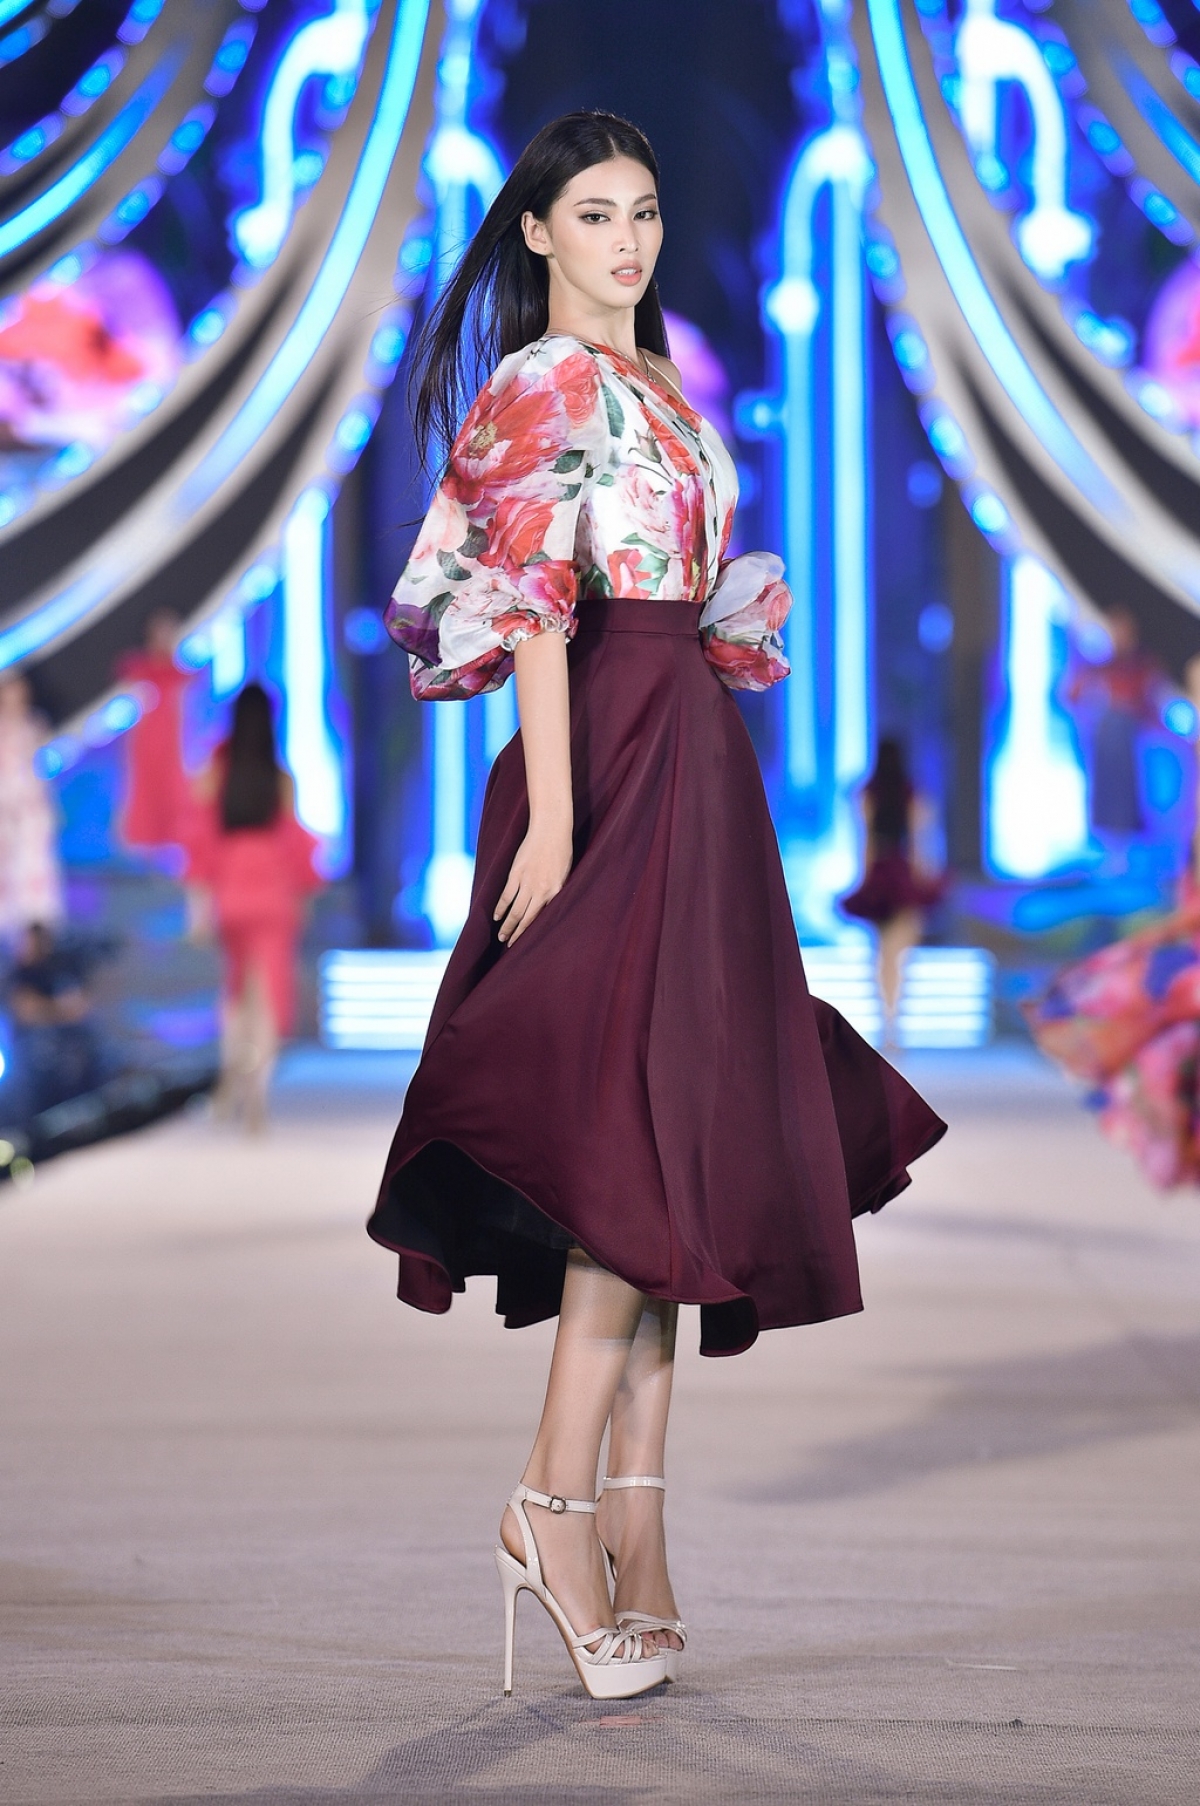 Five winners of the fashion competition are announced, including Le Ngoc Thao.